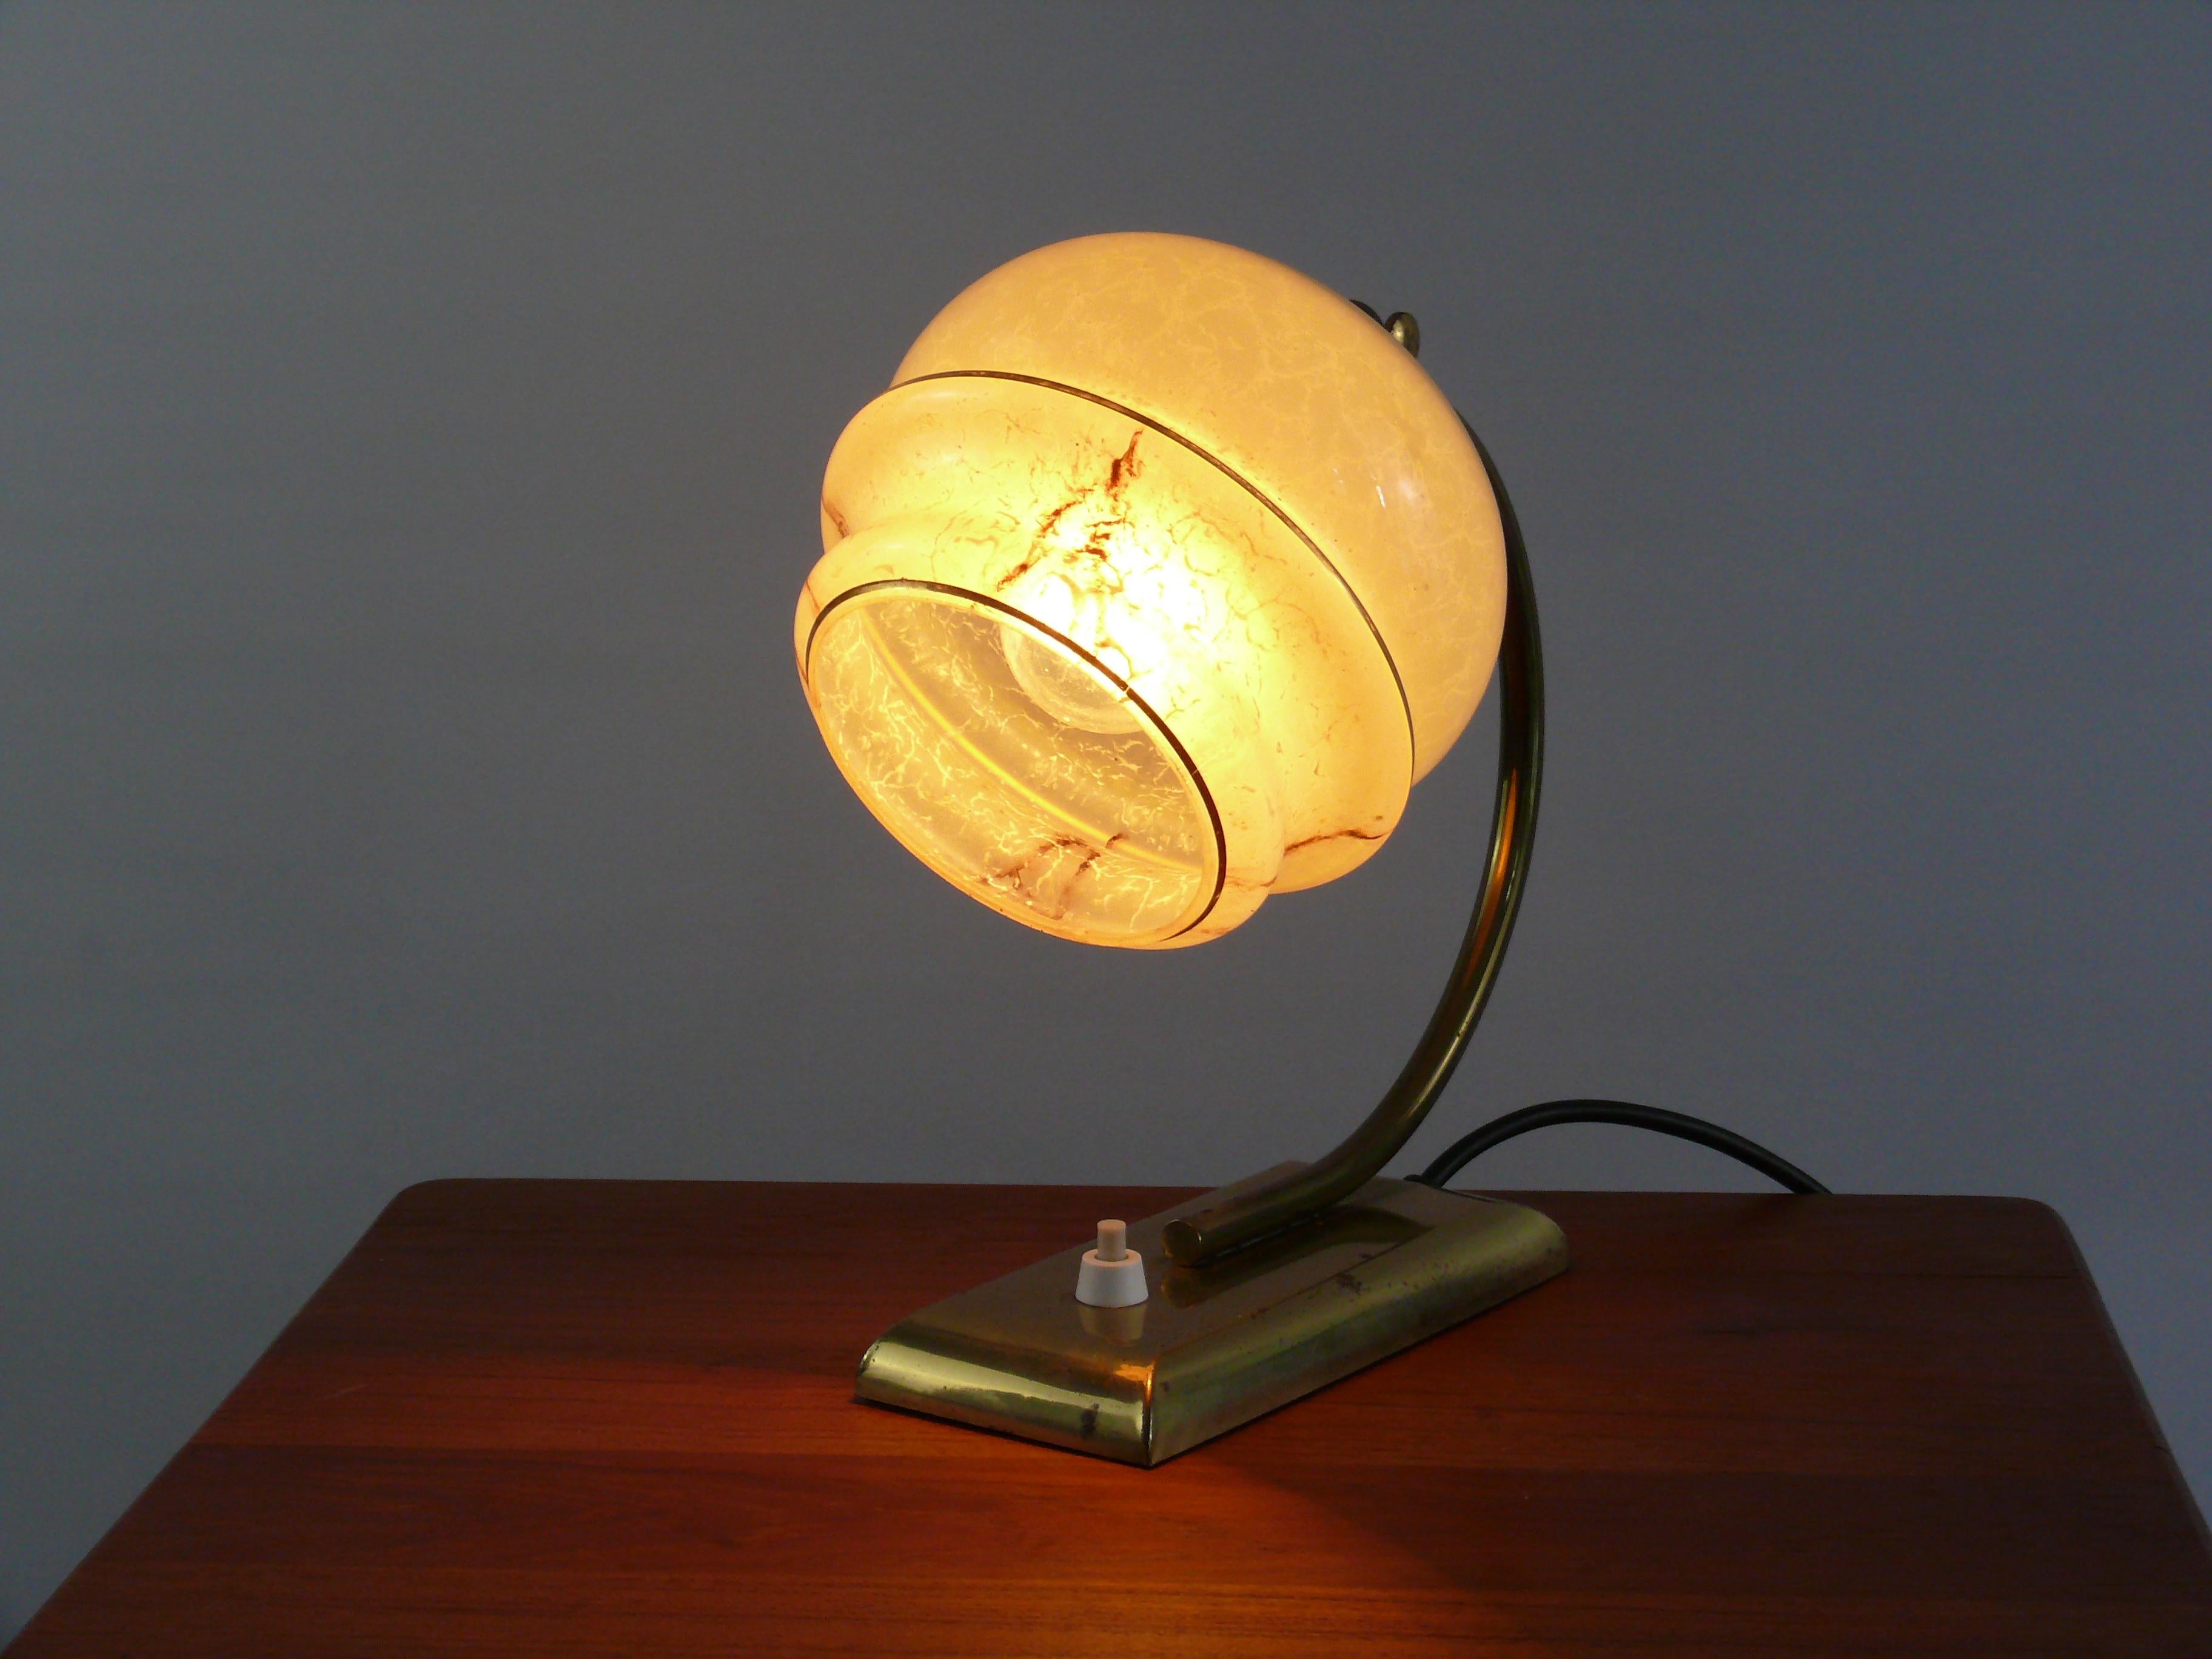 Well-preserved Art Deco table lamp from the 1930s - 1940s. The lamp is made of brass and has a yellow spherical shade with radial decorative stripes. The shade can be adjusted via a joint with a knurled screw. Some of the brass parts show dark